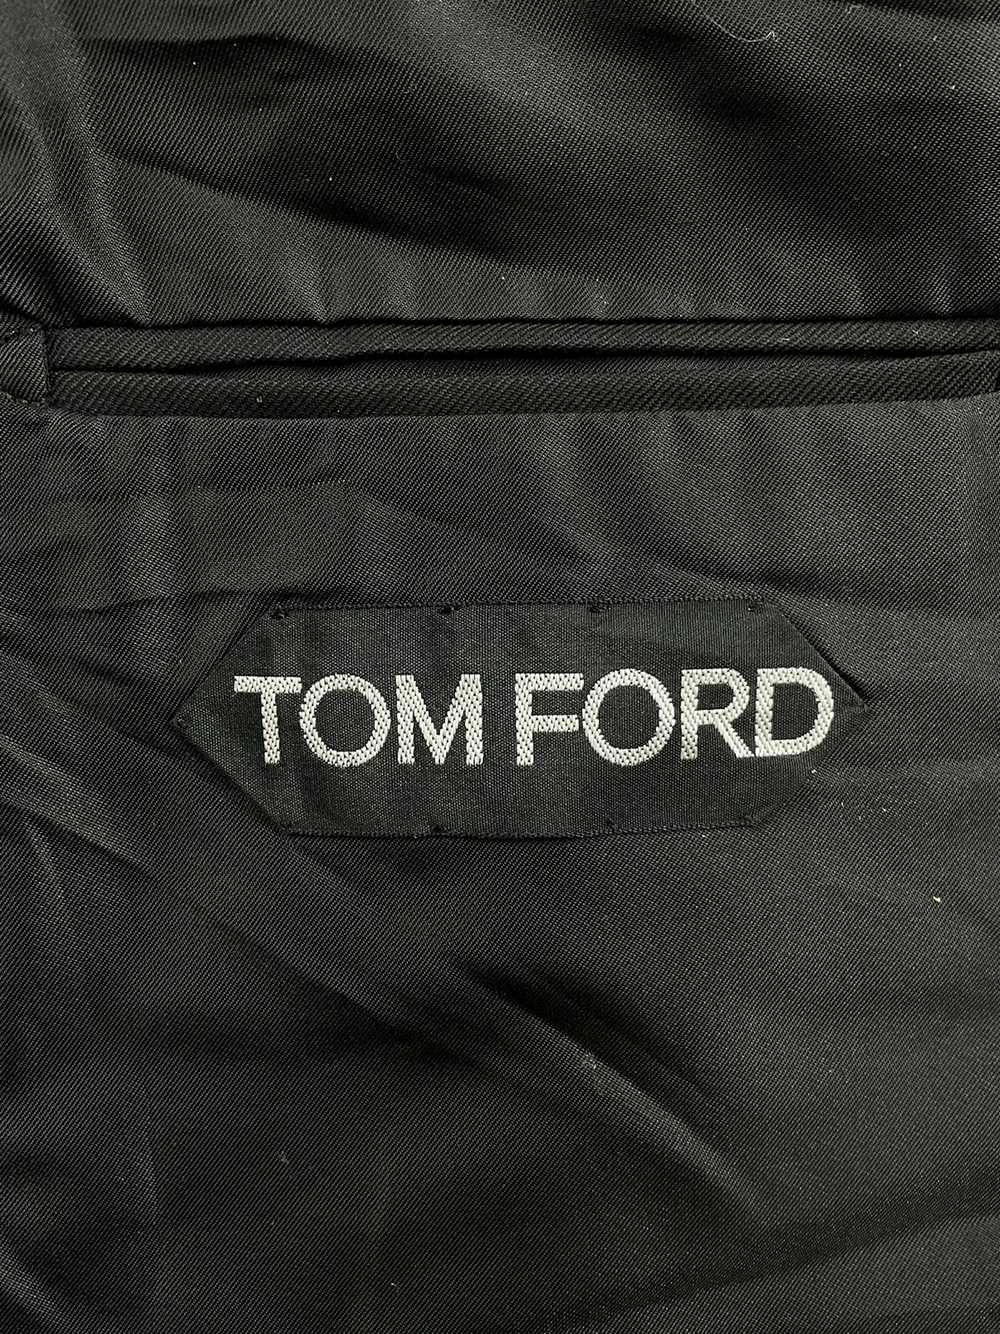 Tom Ford Tom Ford Fit A Jacket - image 9